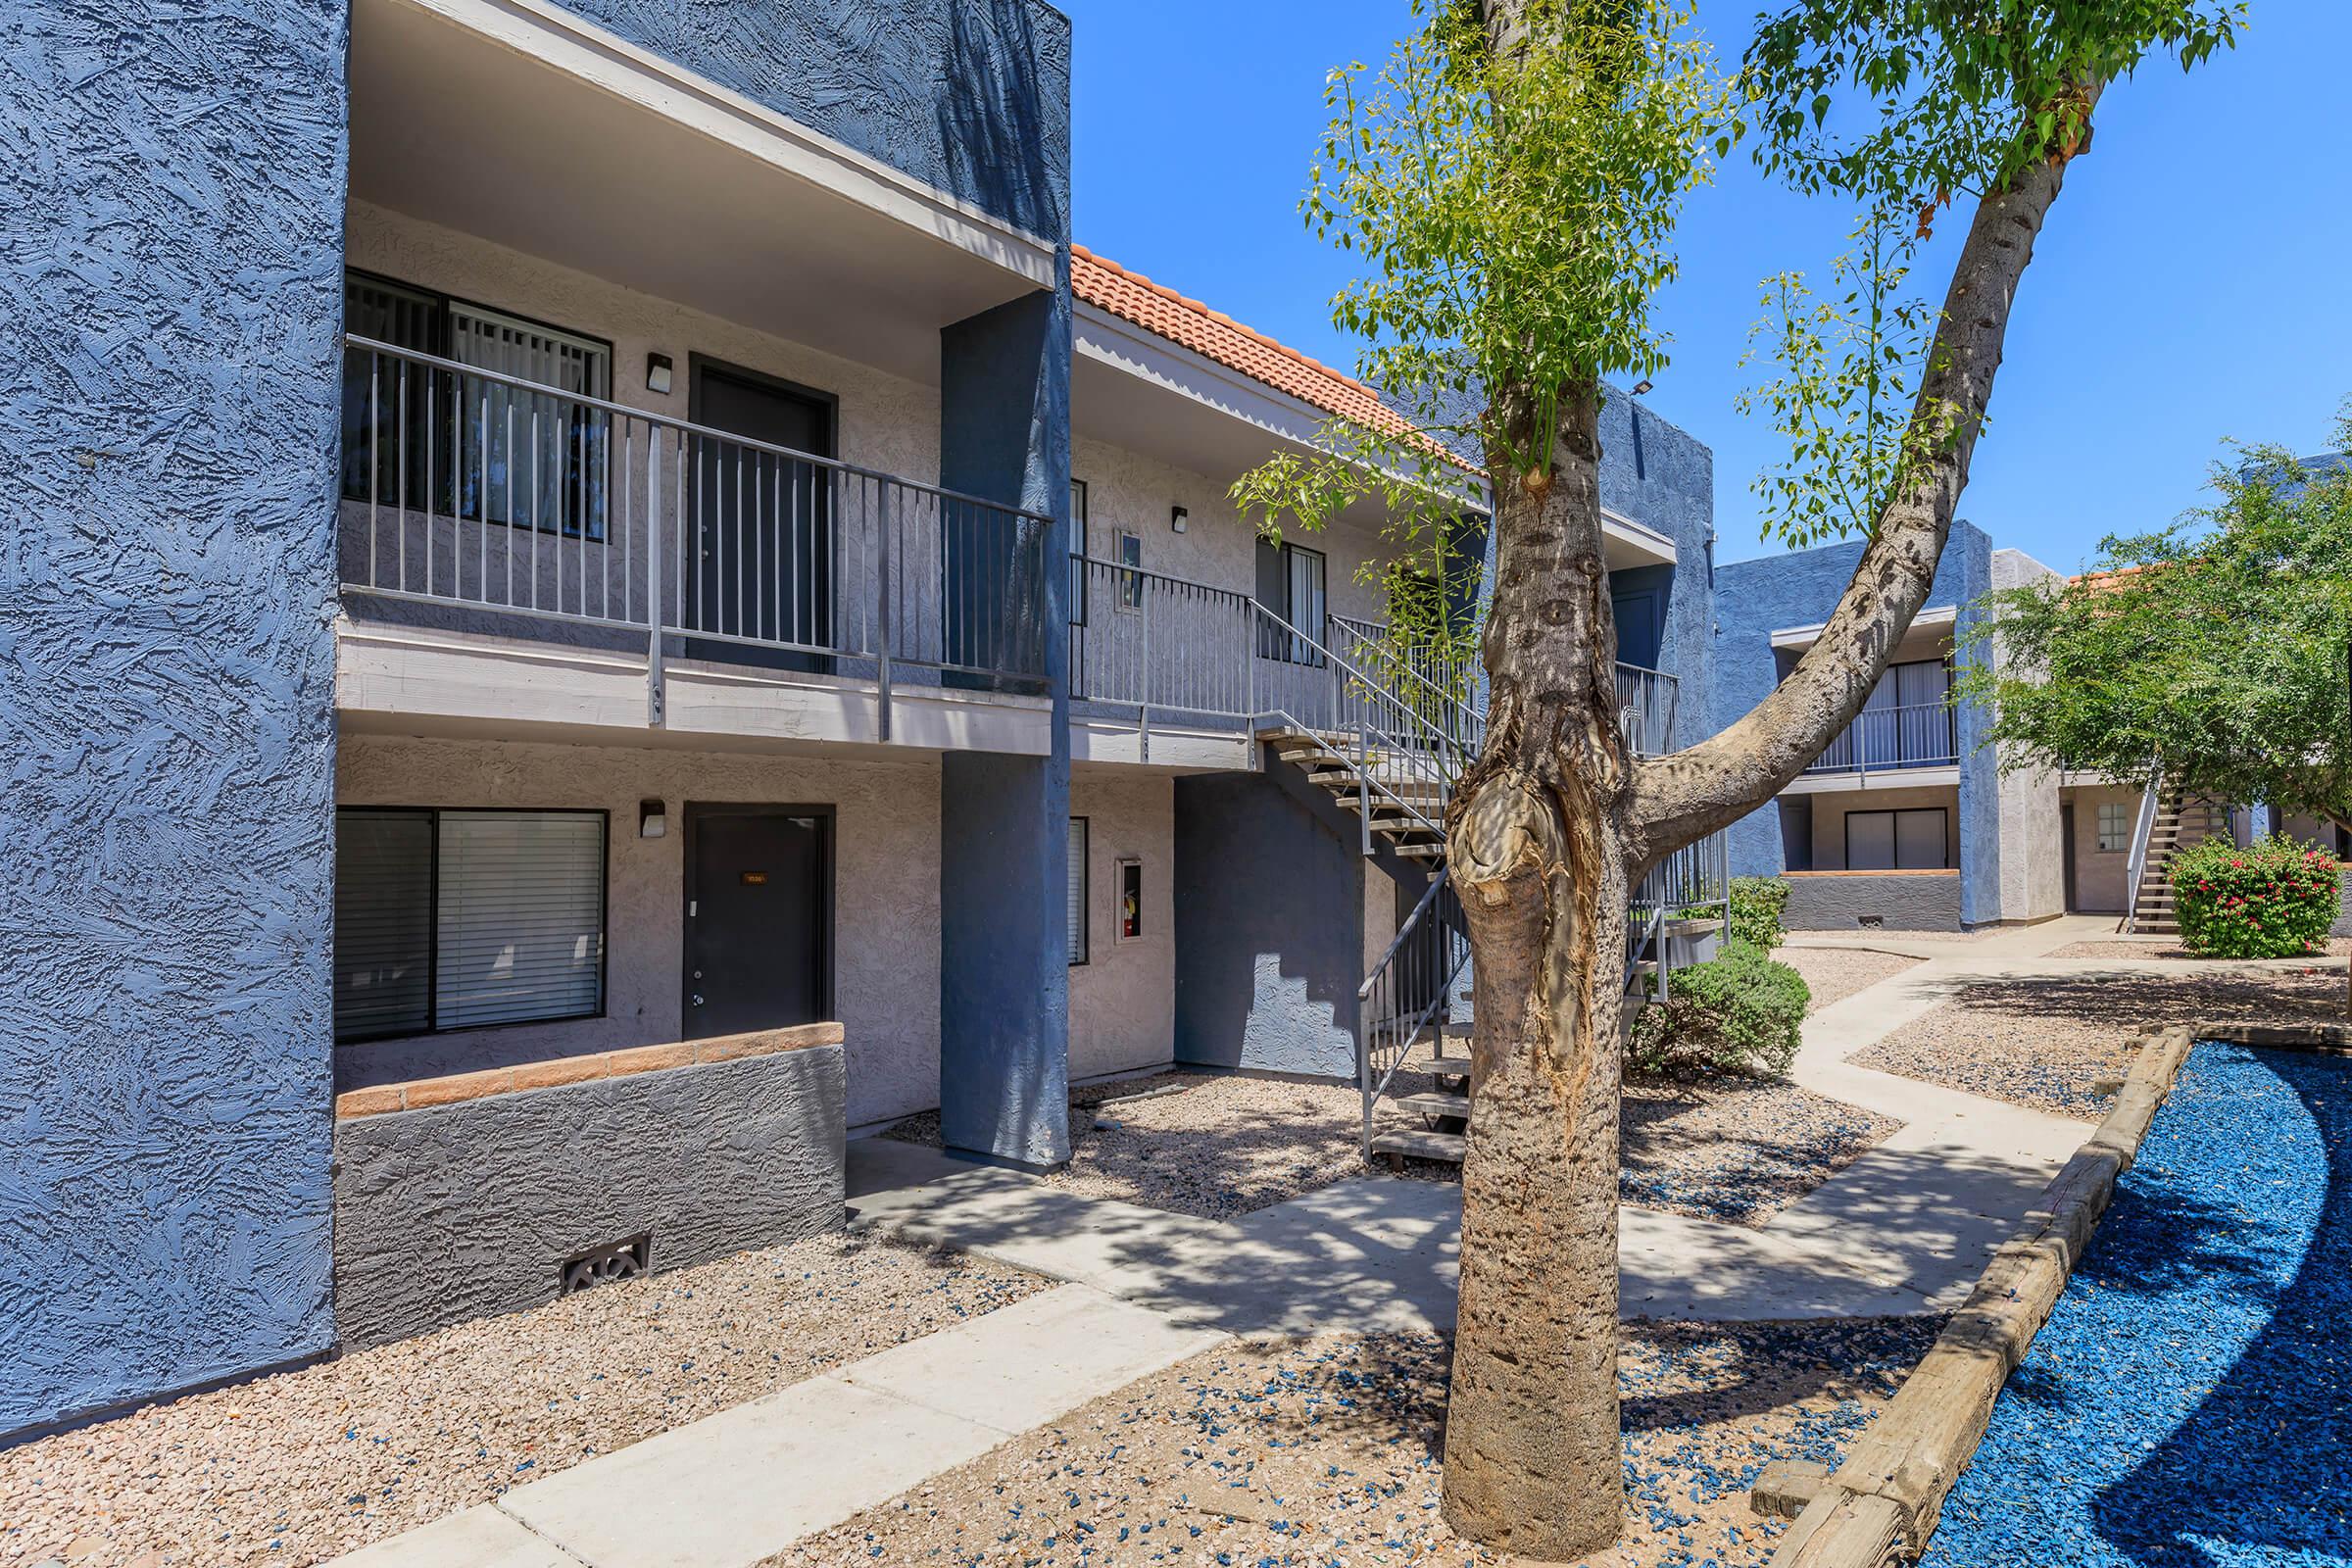 Outdoor pathways leading up to a large two-story Phoenix, AZ apartment building